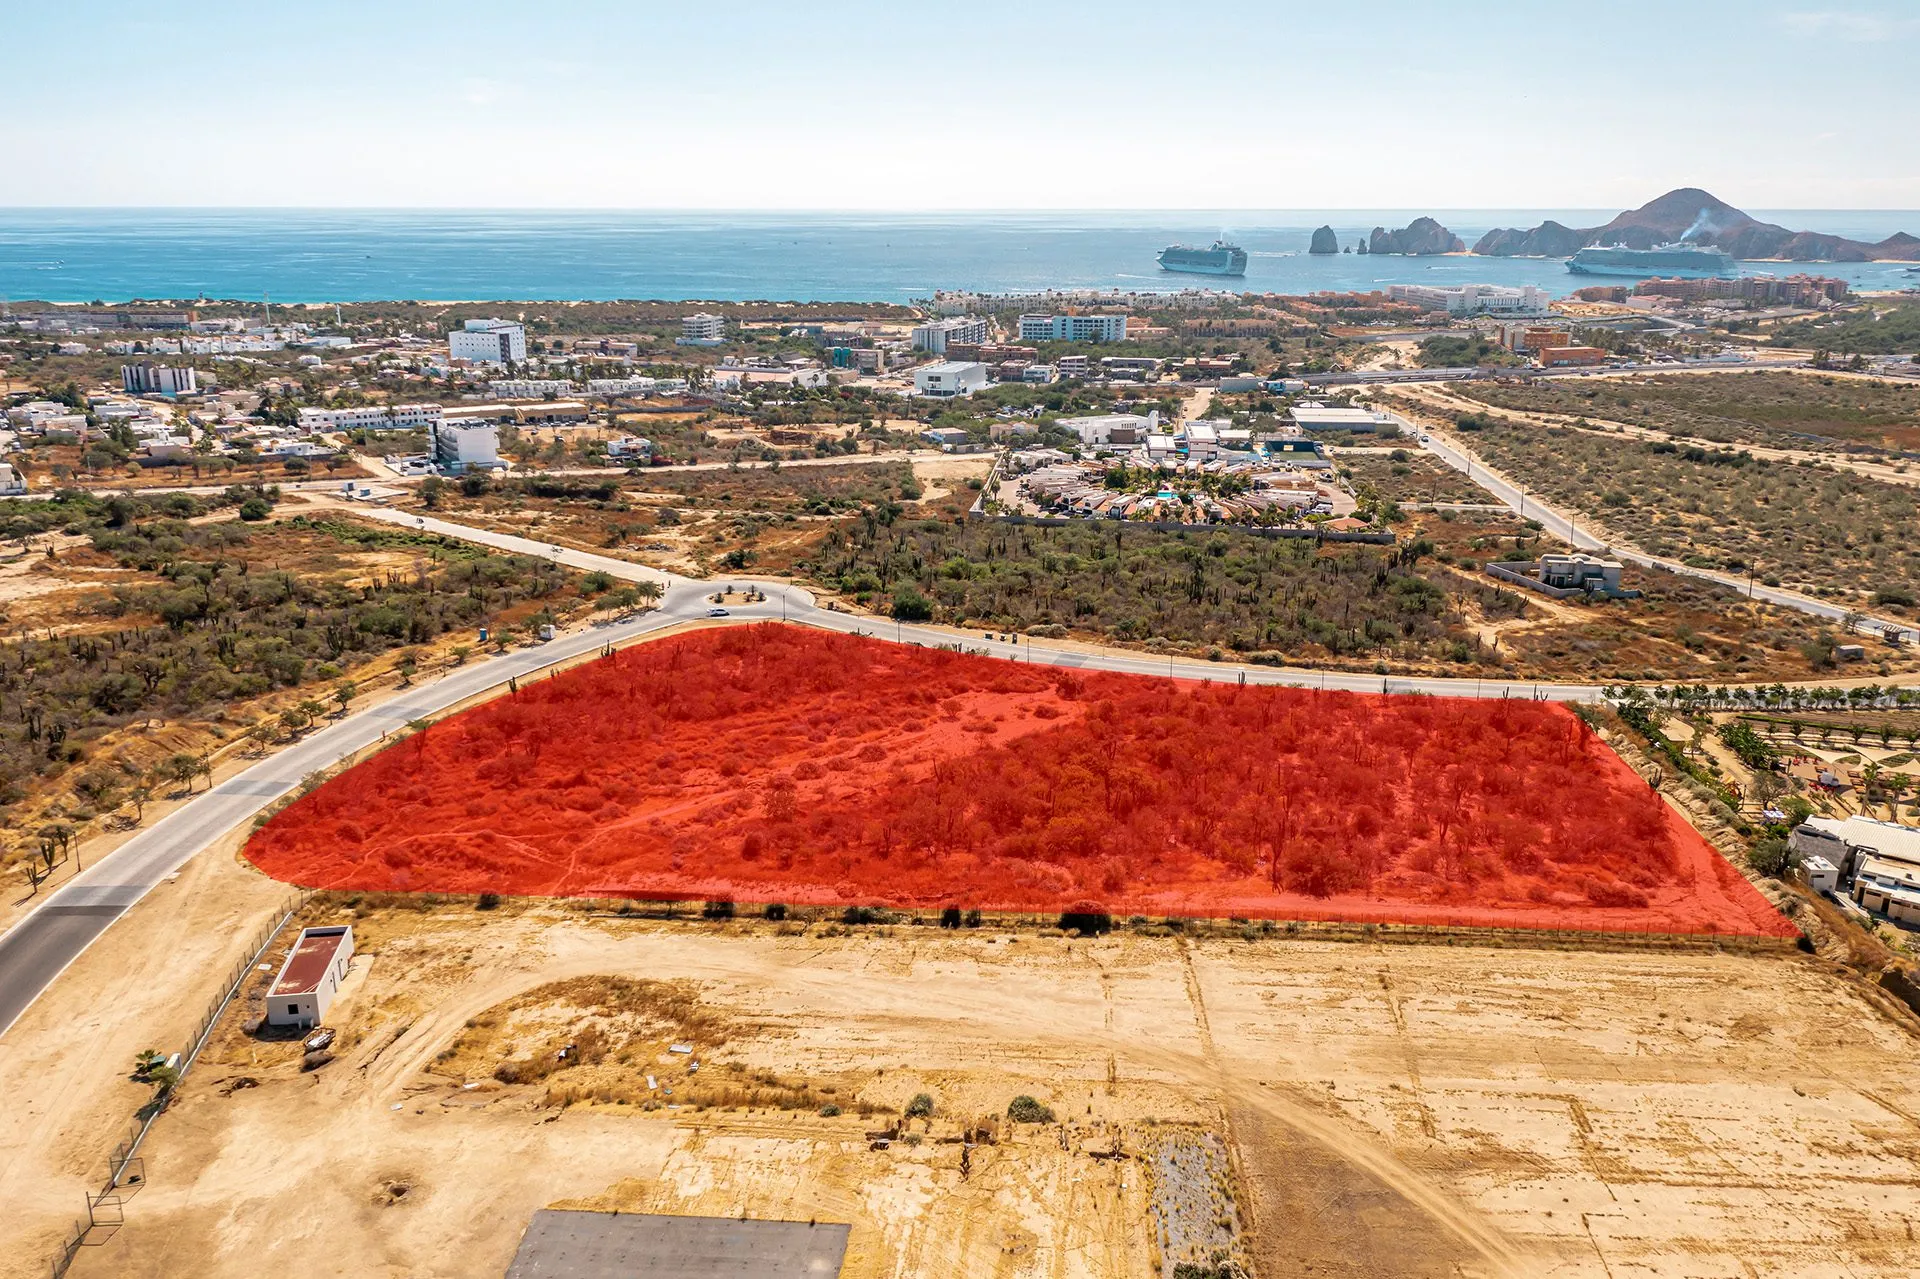 Lot III, is an excellent option for comercial or residential development. This 6.8 acre parcel is located inside one of the most popular communities in Los Cabos.